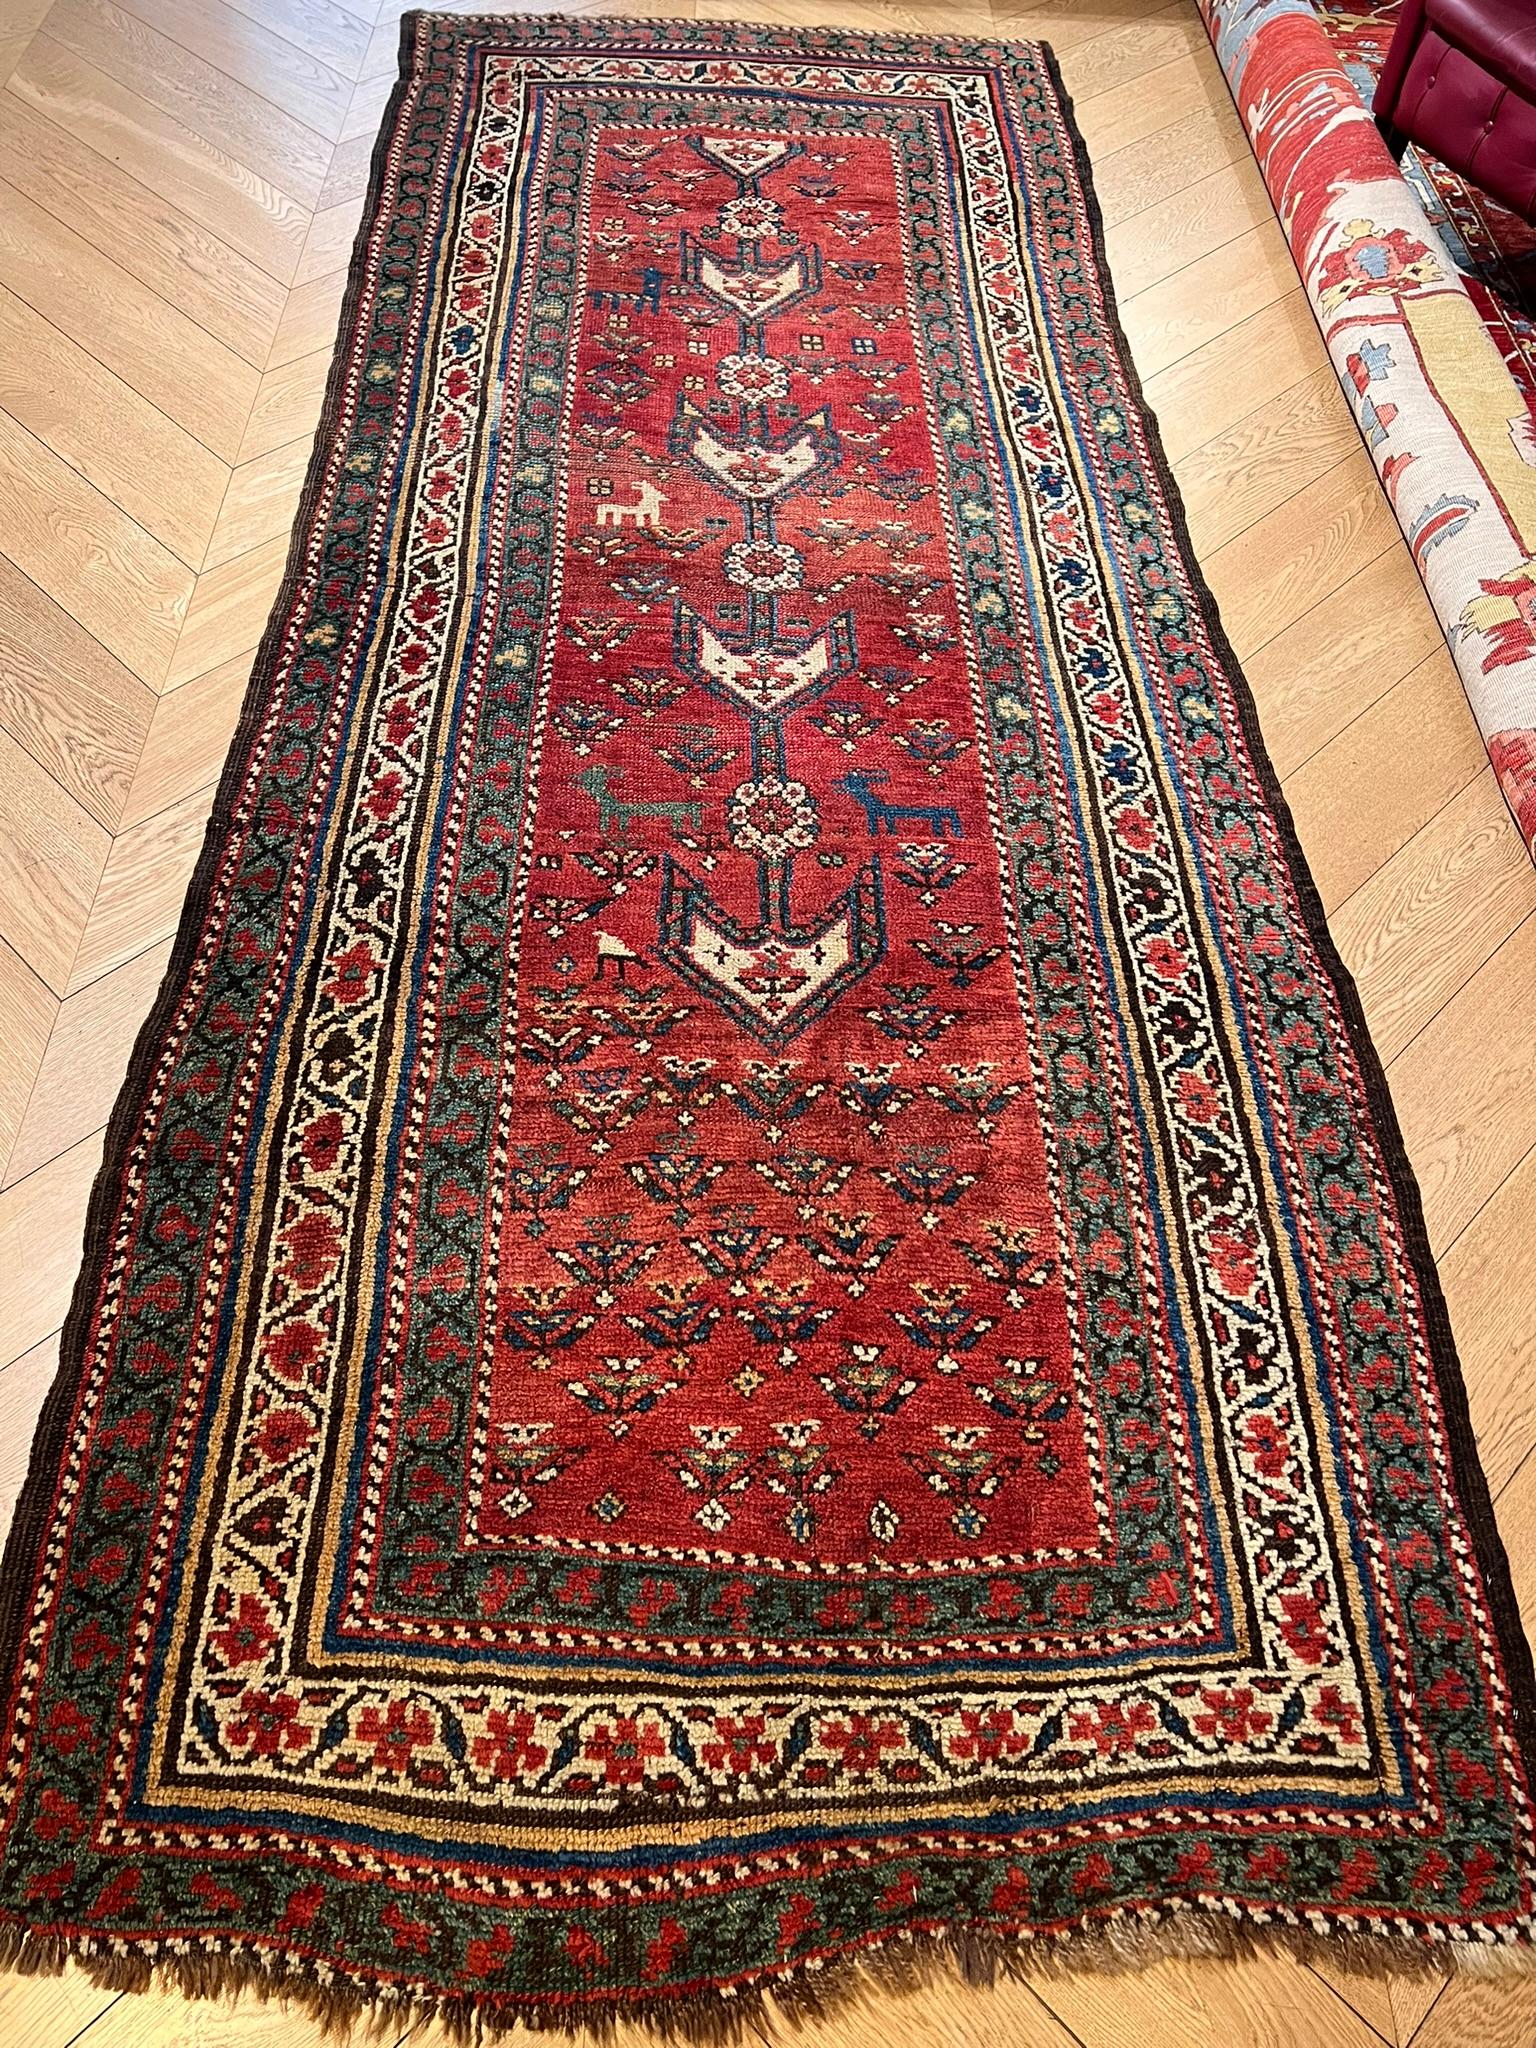 This carpet was made at the nomadic tribe  Shahsavand moving into the northwestern provinces of Azarbaijan and Ardebil.  Made using ancient techniques passed down from generation to generation, Shahsavand carpets feature zoomorphic patterns along